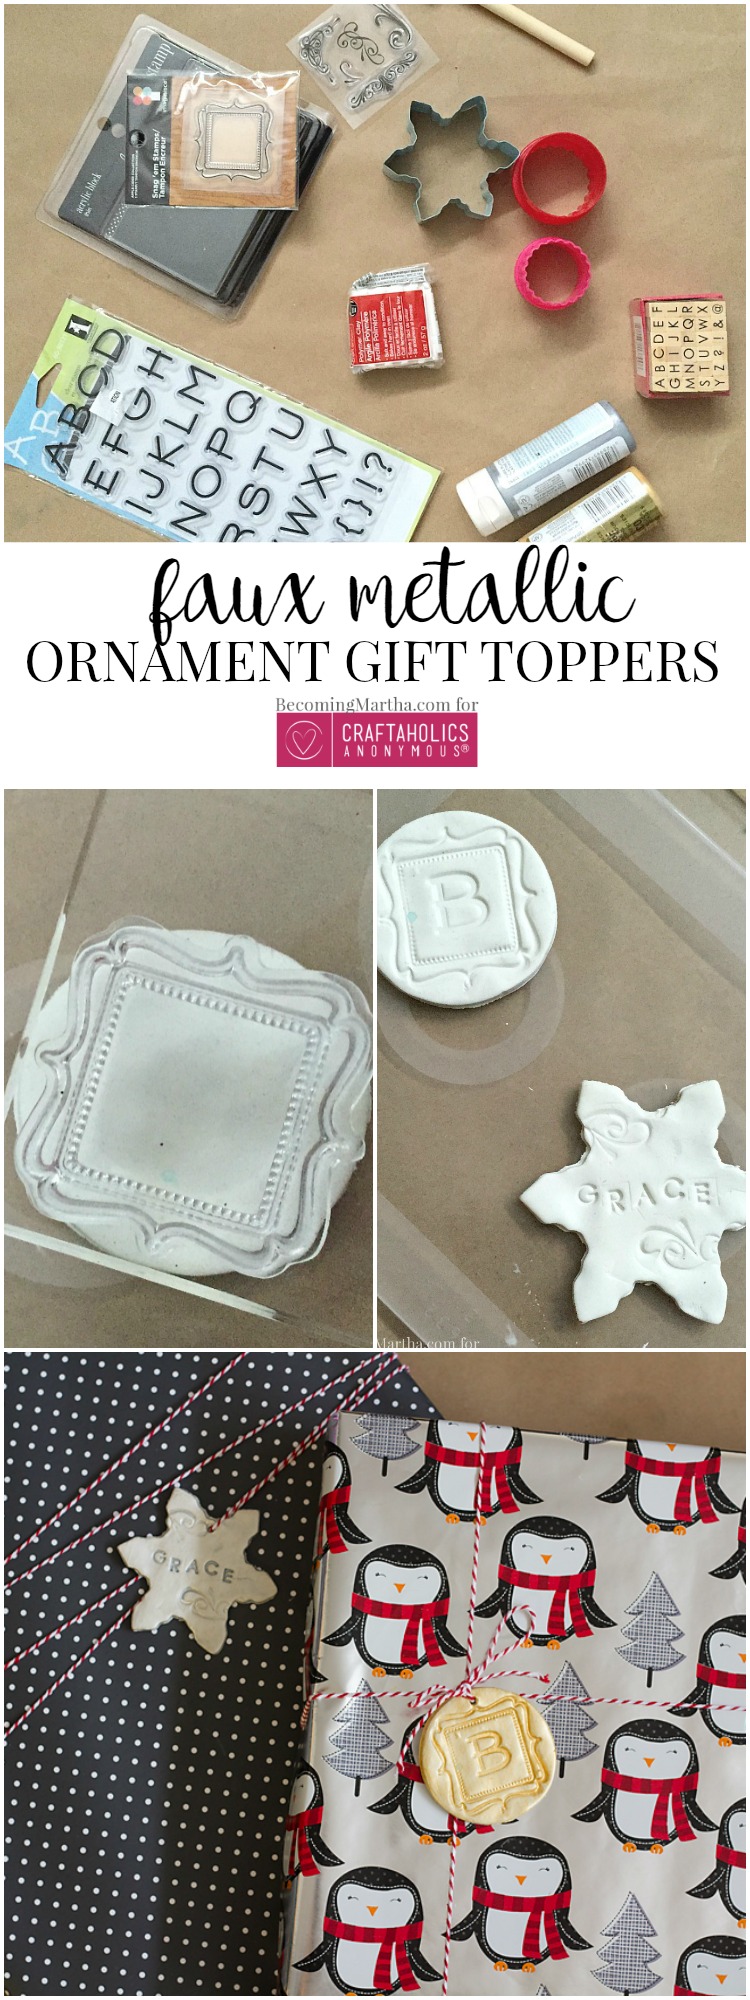 How to Make a Monogrammed Gift Topper